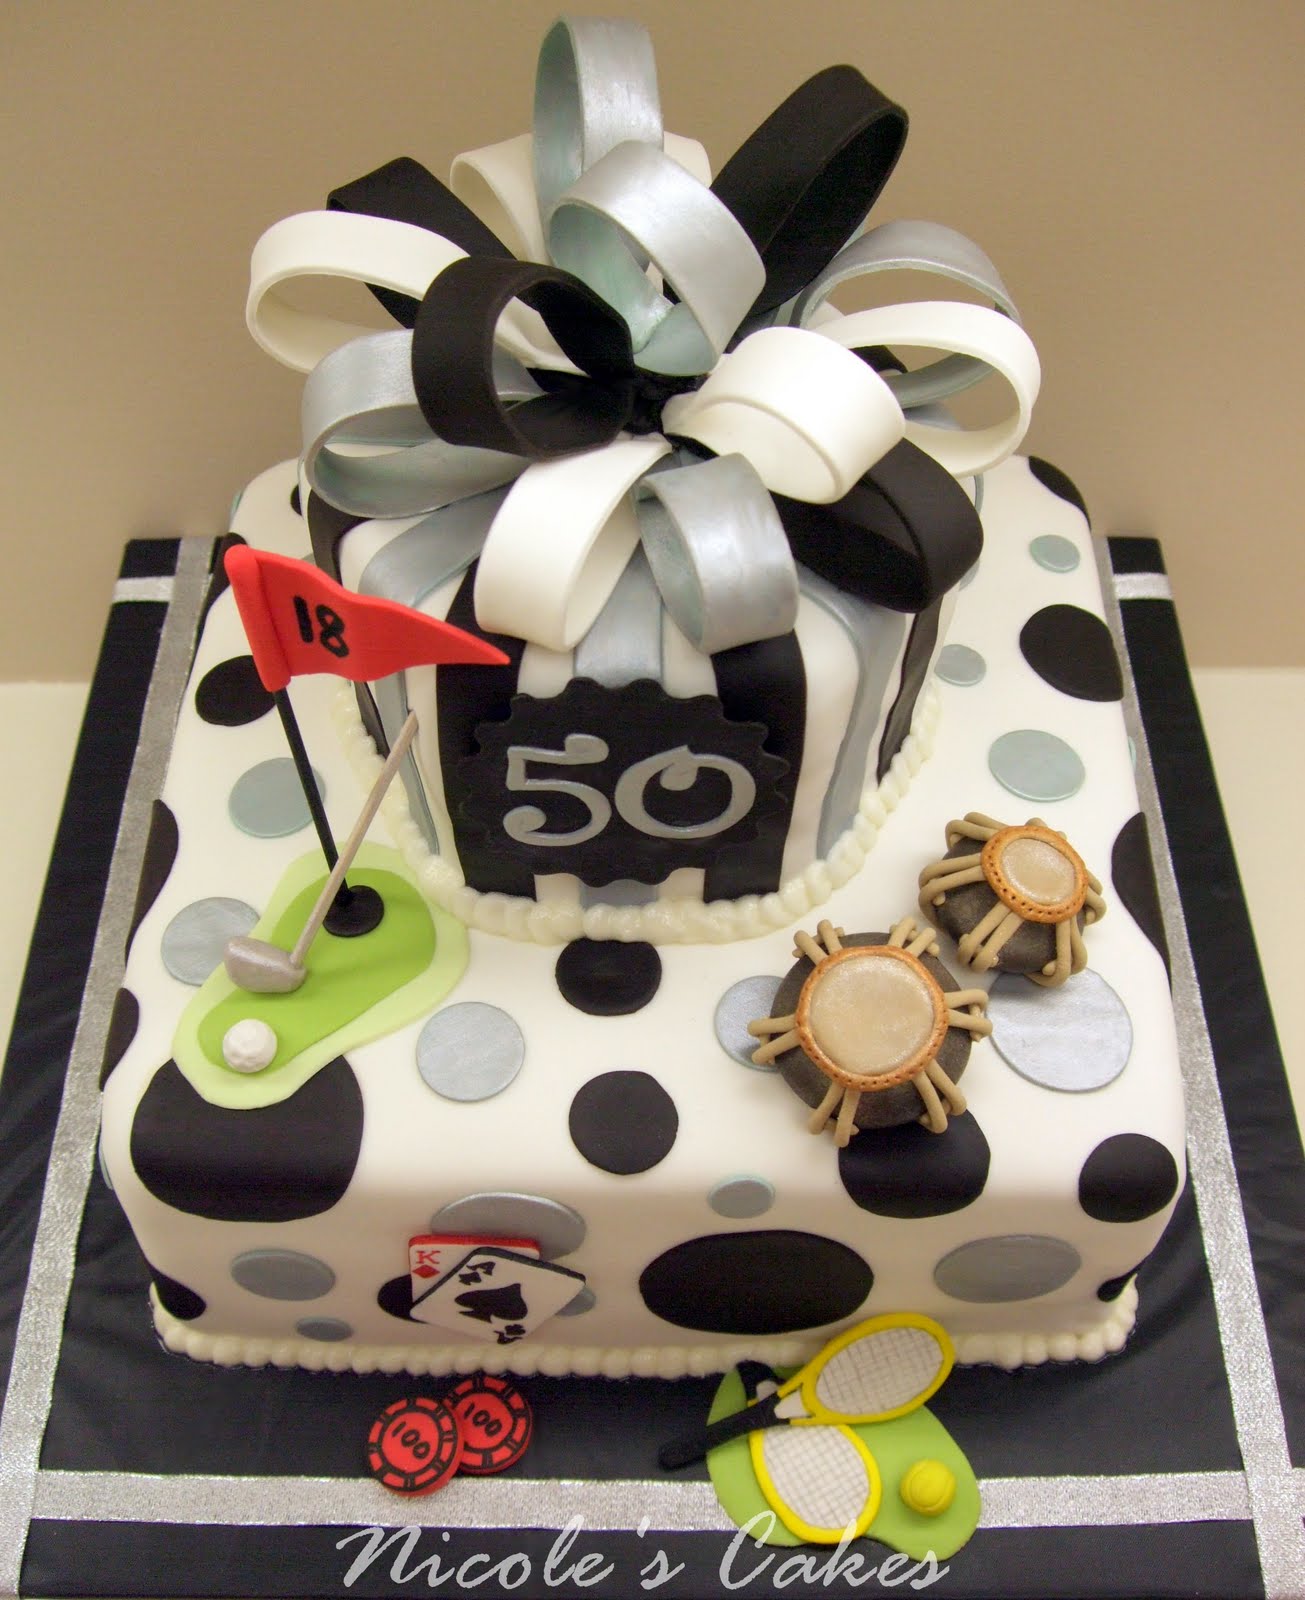 On Birthday Cakes: 'Favorite Things' : A 50th Birthday Cake